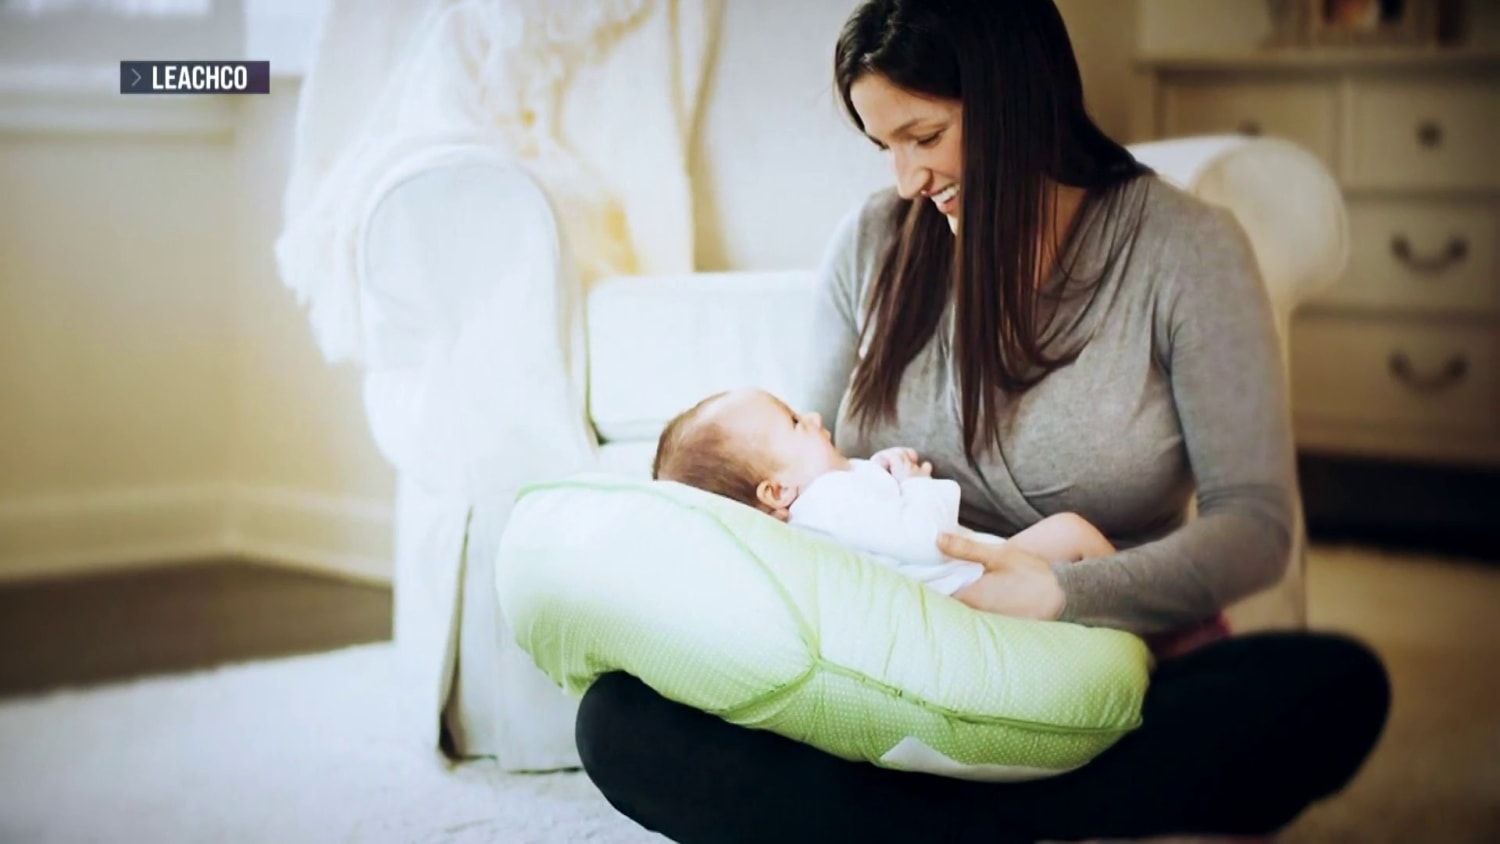 Improper use of Boppy nursing pillows, loungers linked to 7 infant deaths -  Good Morning America